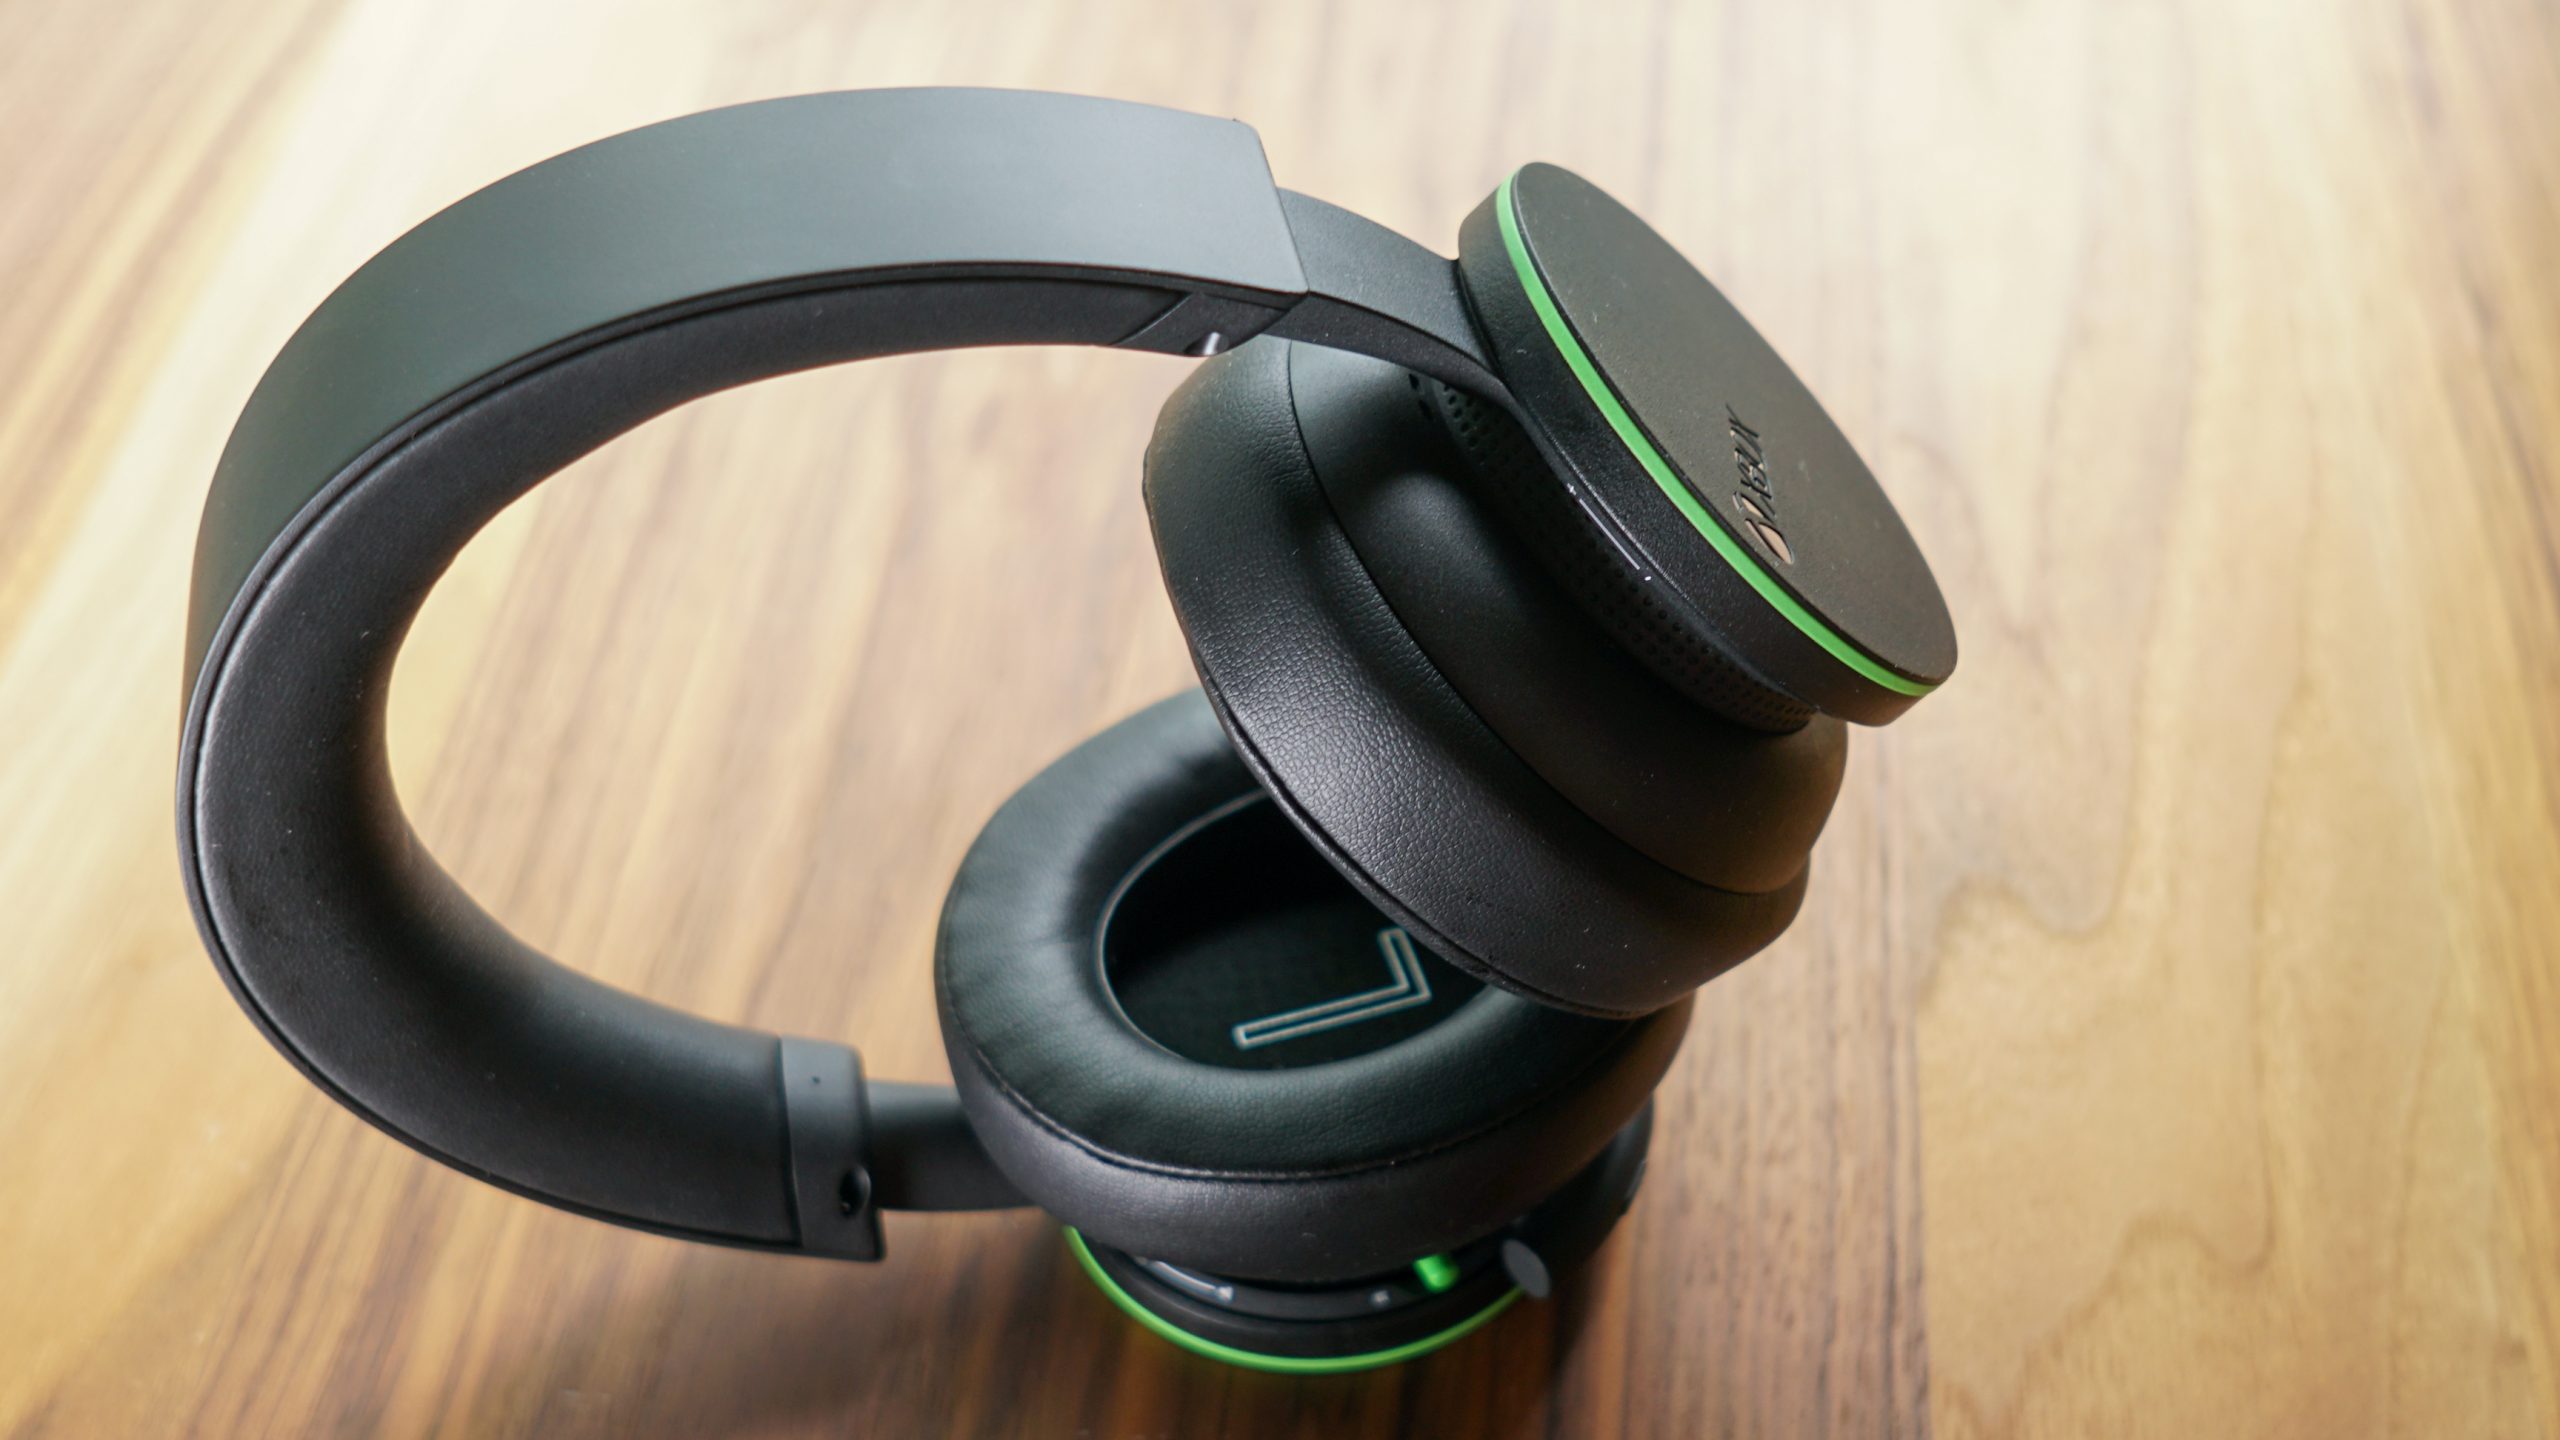 The Xbox Wireless Headset sits on a wooden table with its controls displayed.